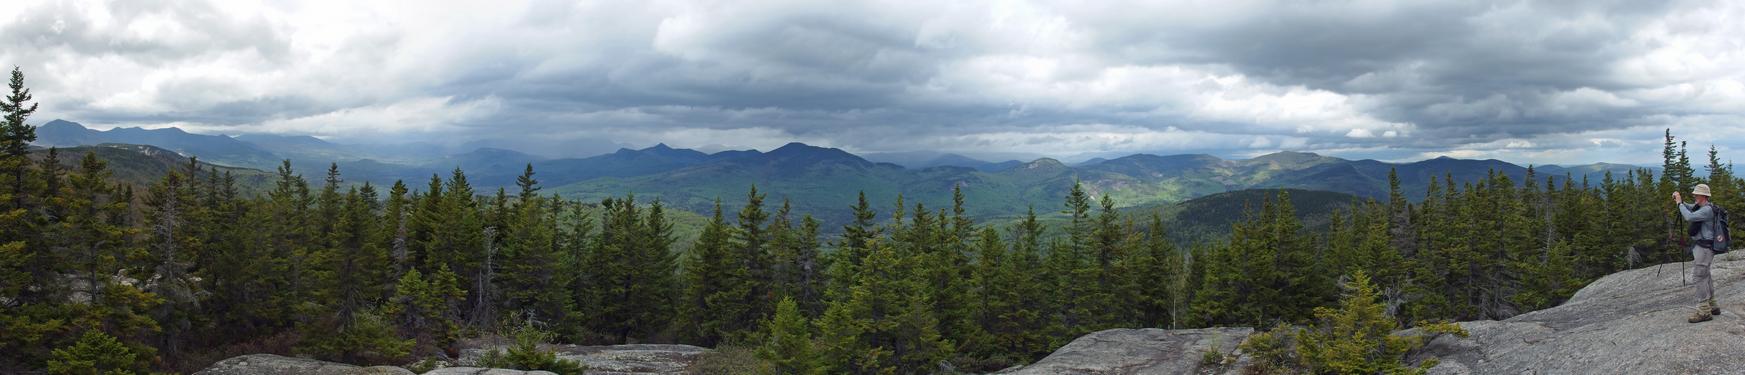 180-degree panoramic view from the Middle Sister Trail near Blue Mountain in the White Mountains of New Hampshire